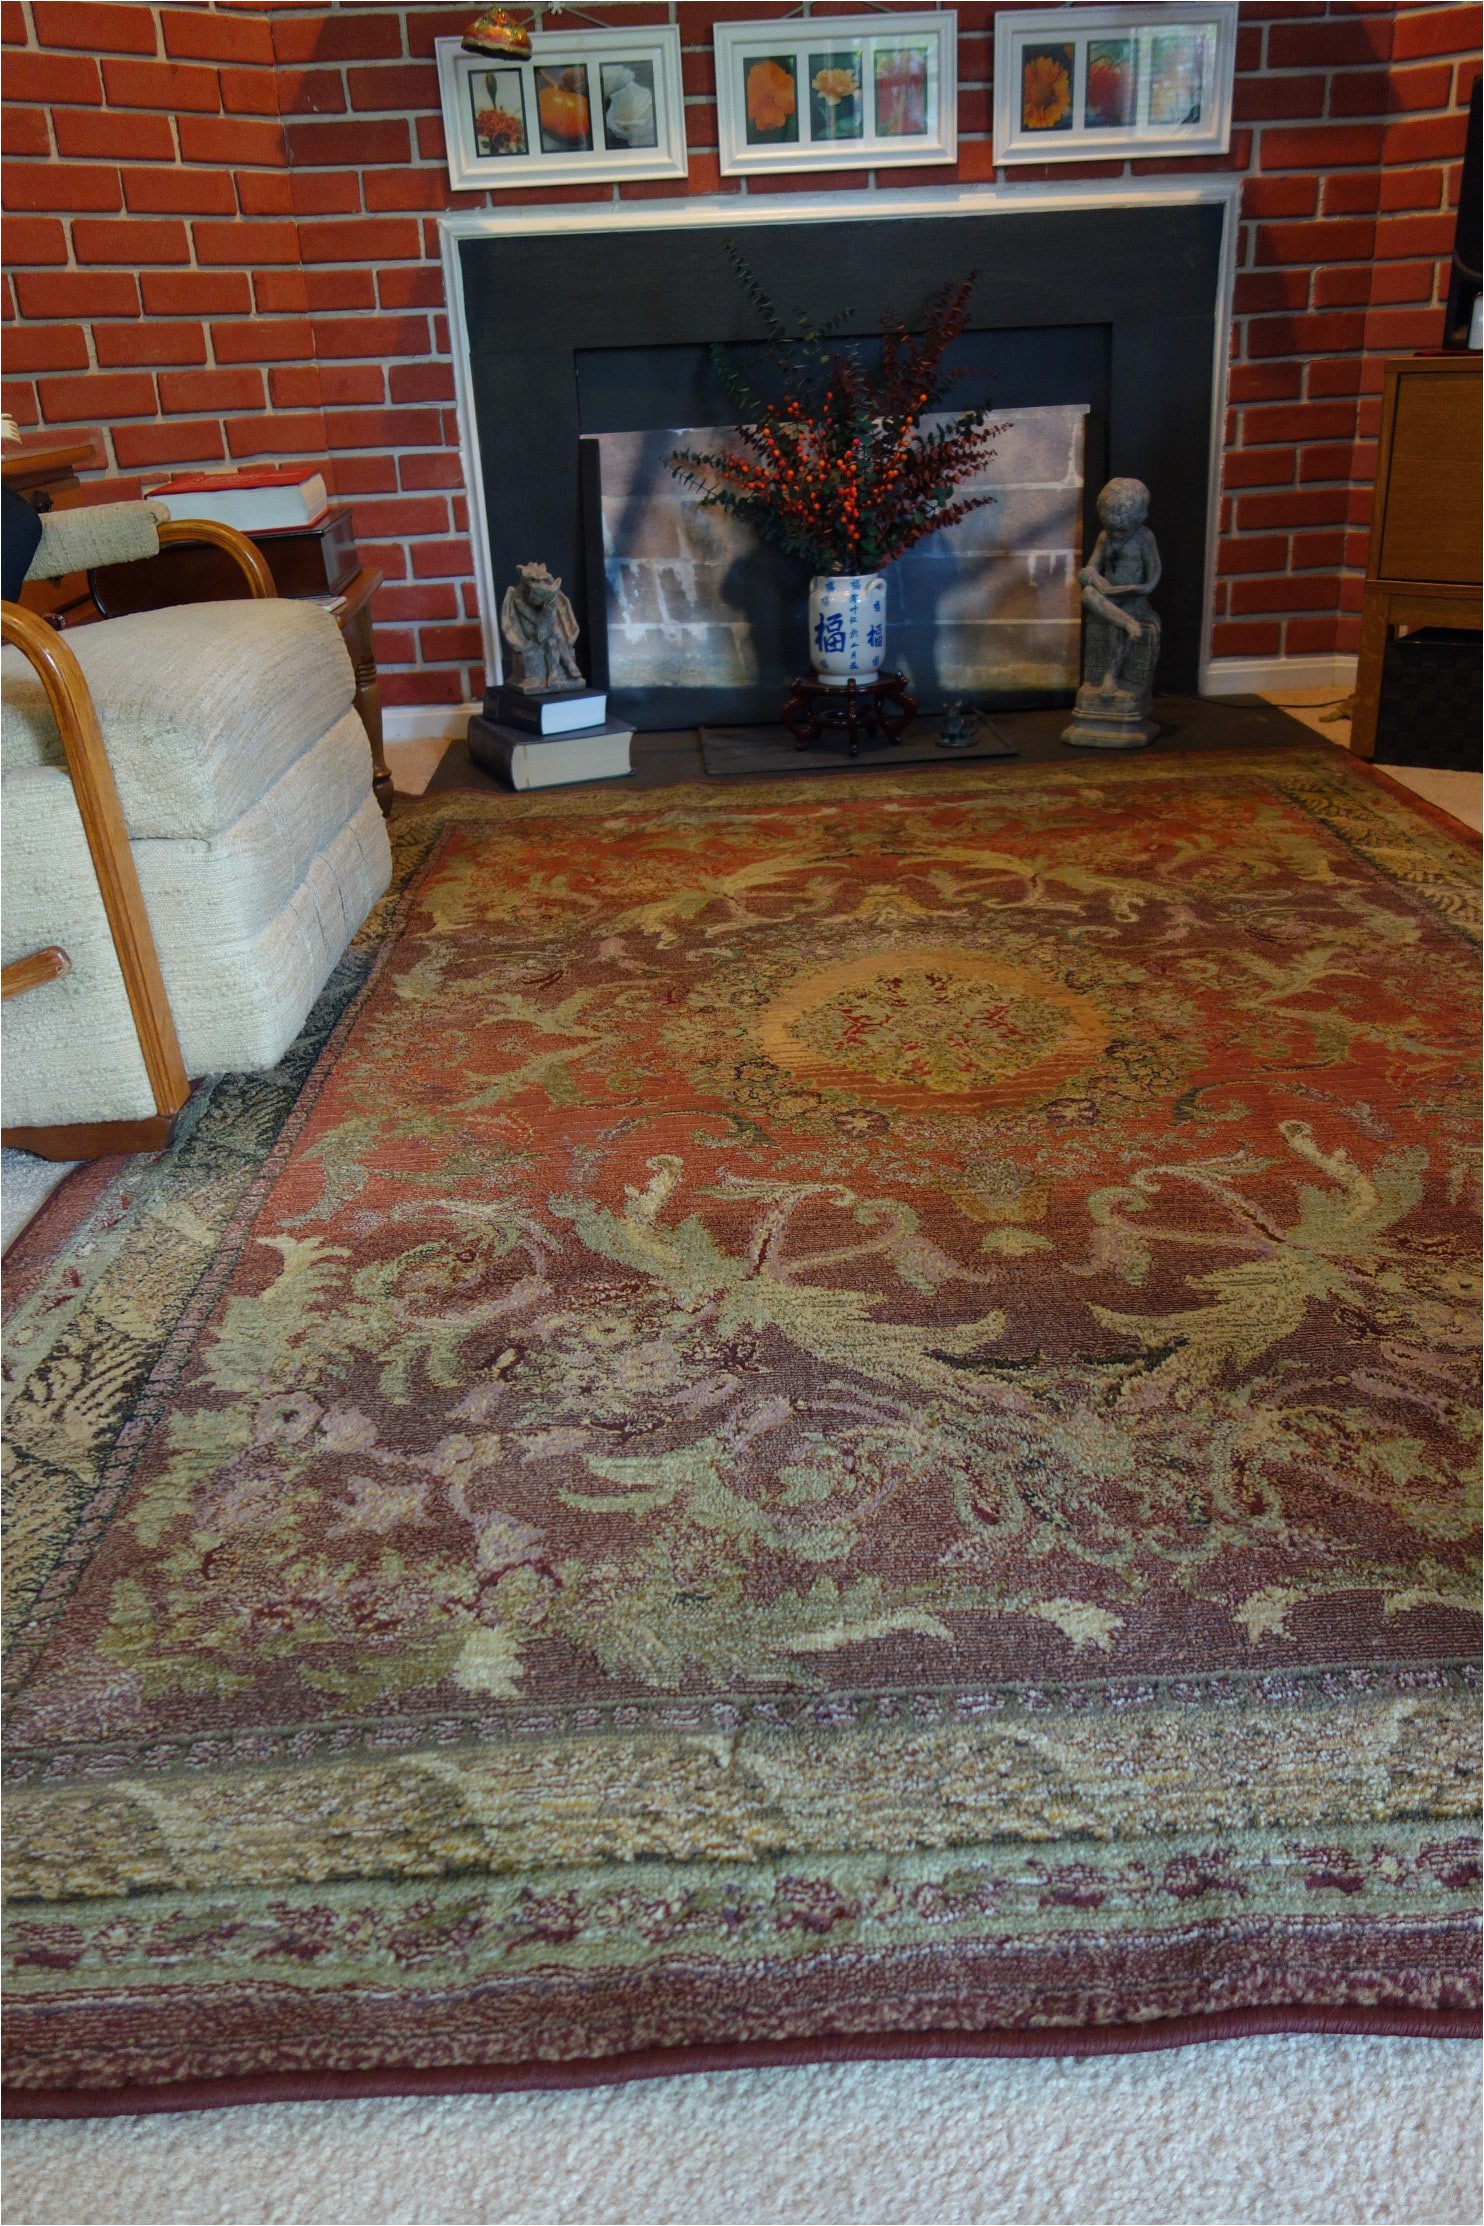 Stop area Rug From Sliding How to Keep An area Rug From Creeping On A Carpeted Floor